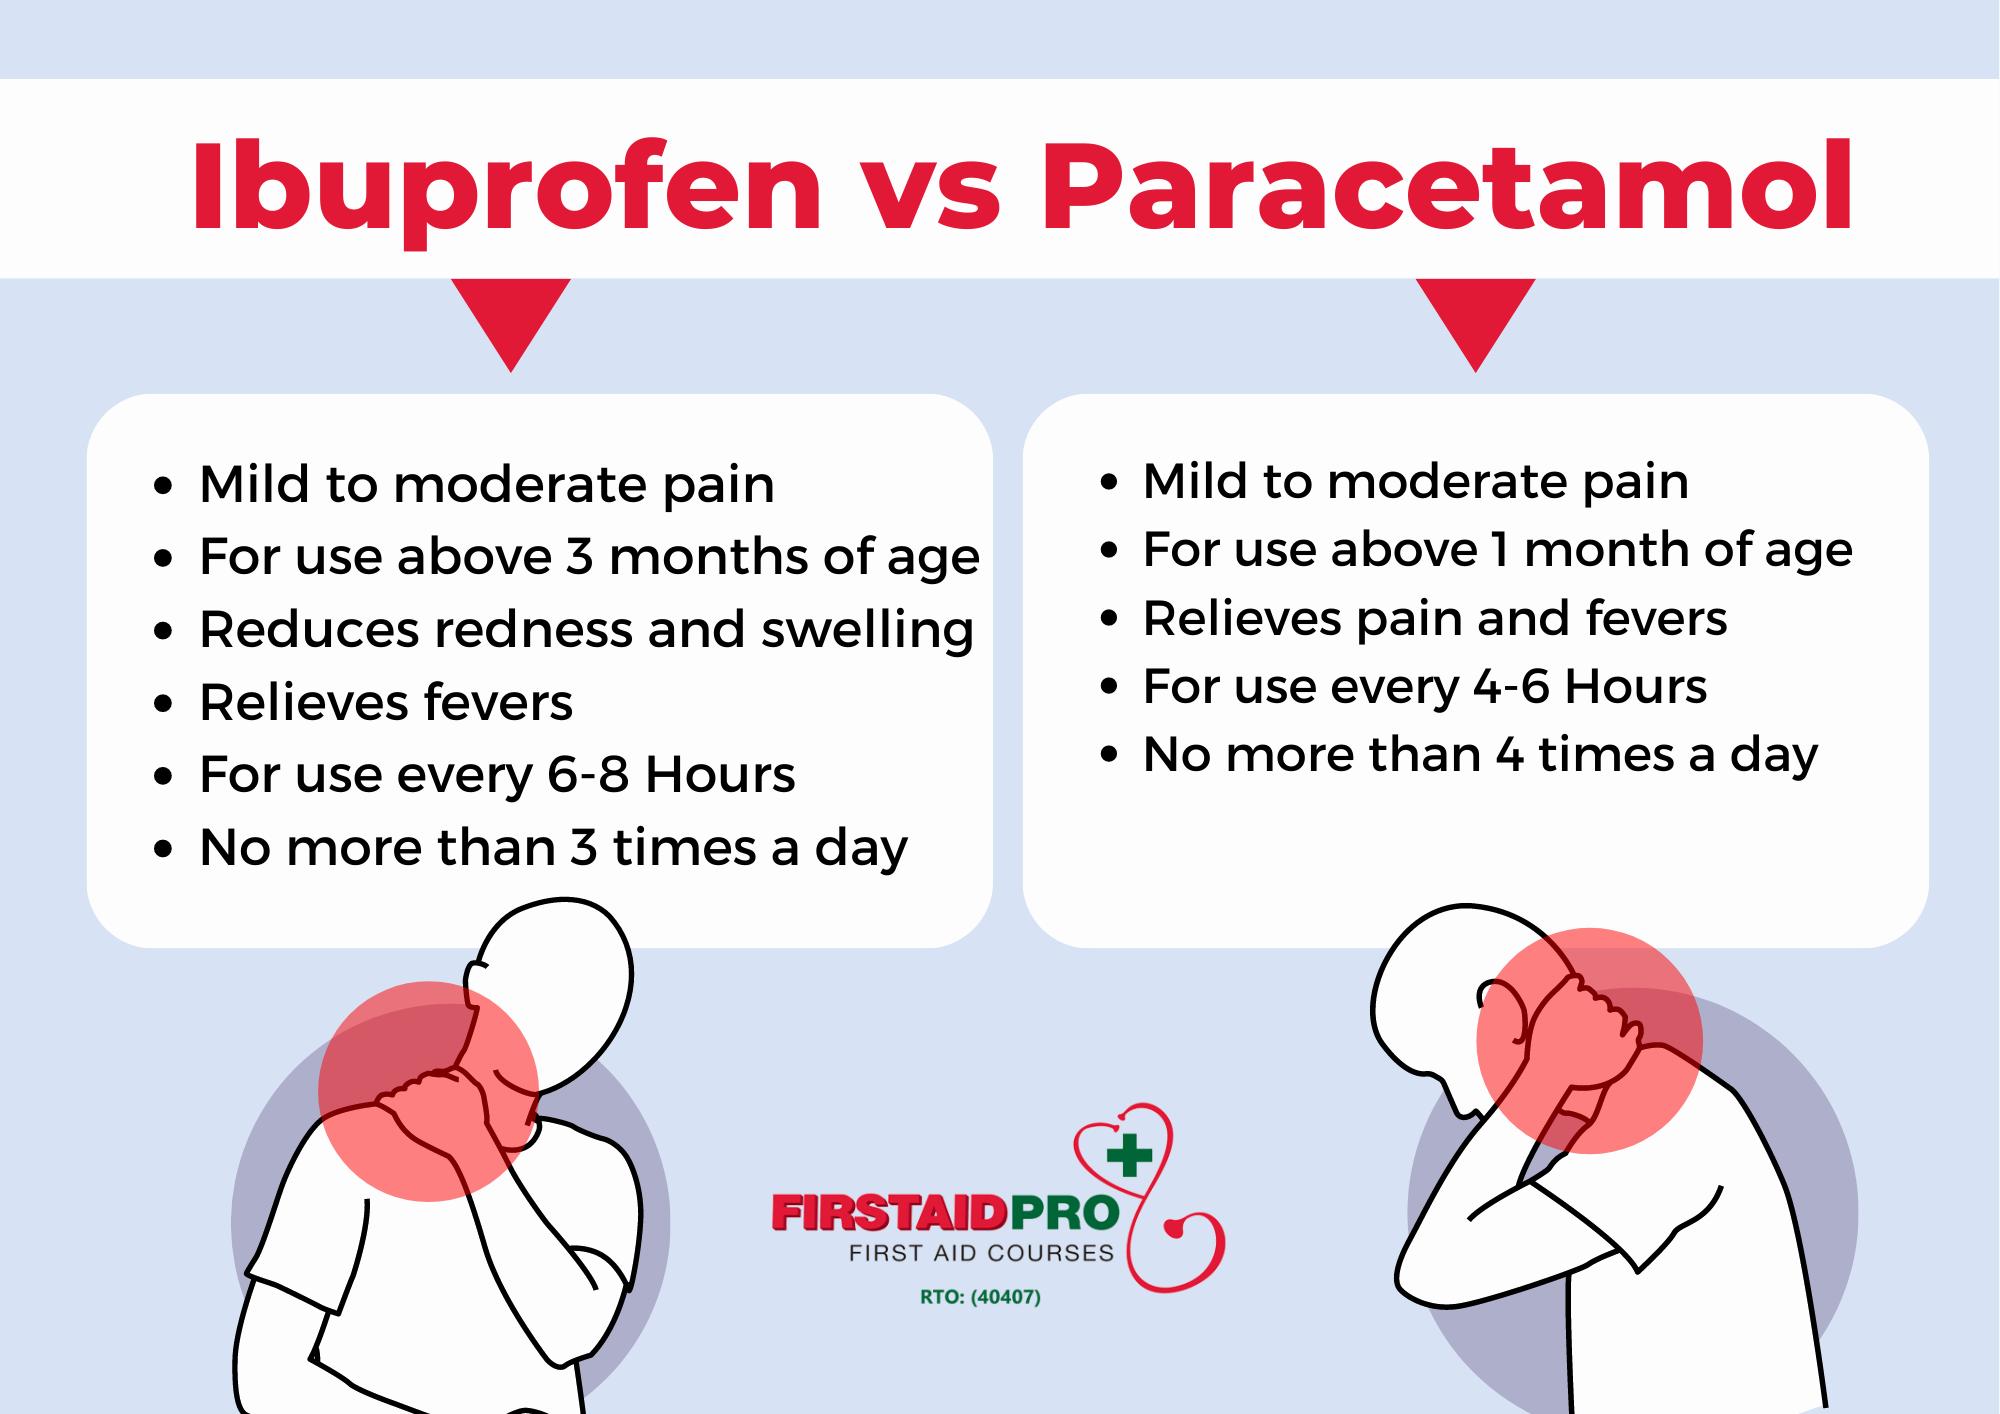 A comparison of ibuprofen and paracetamol, including the age at which they can be used, how often they can be taken, and what they are used for.